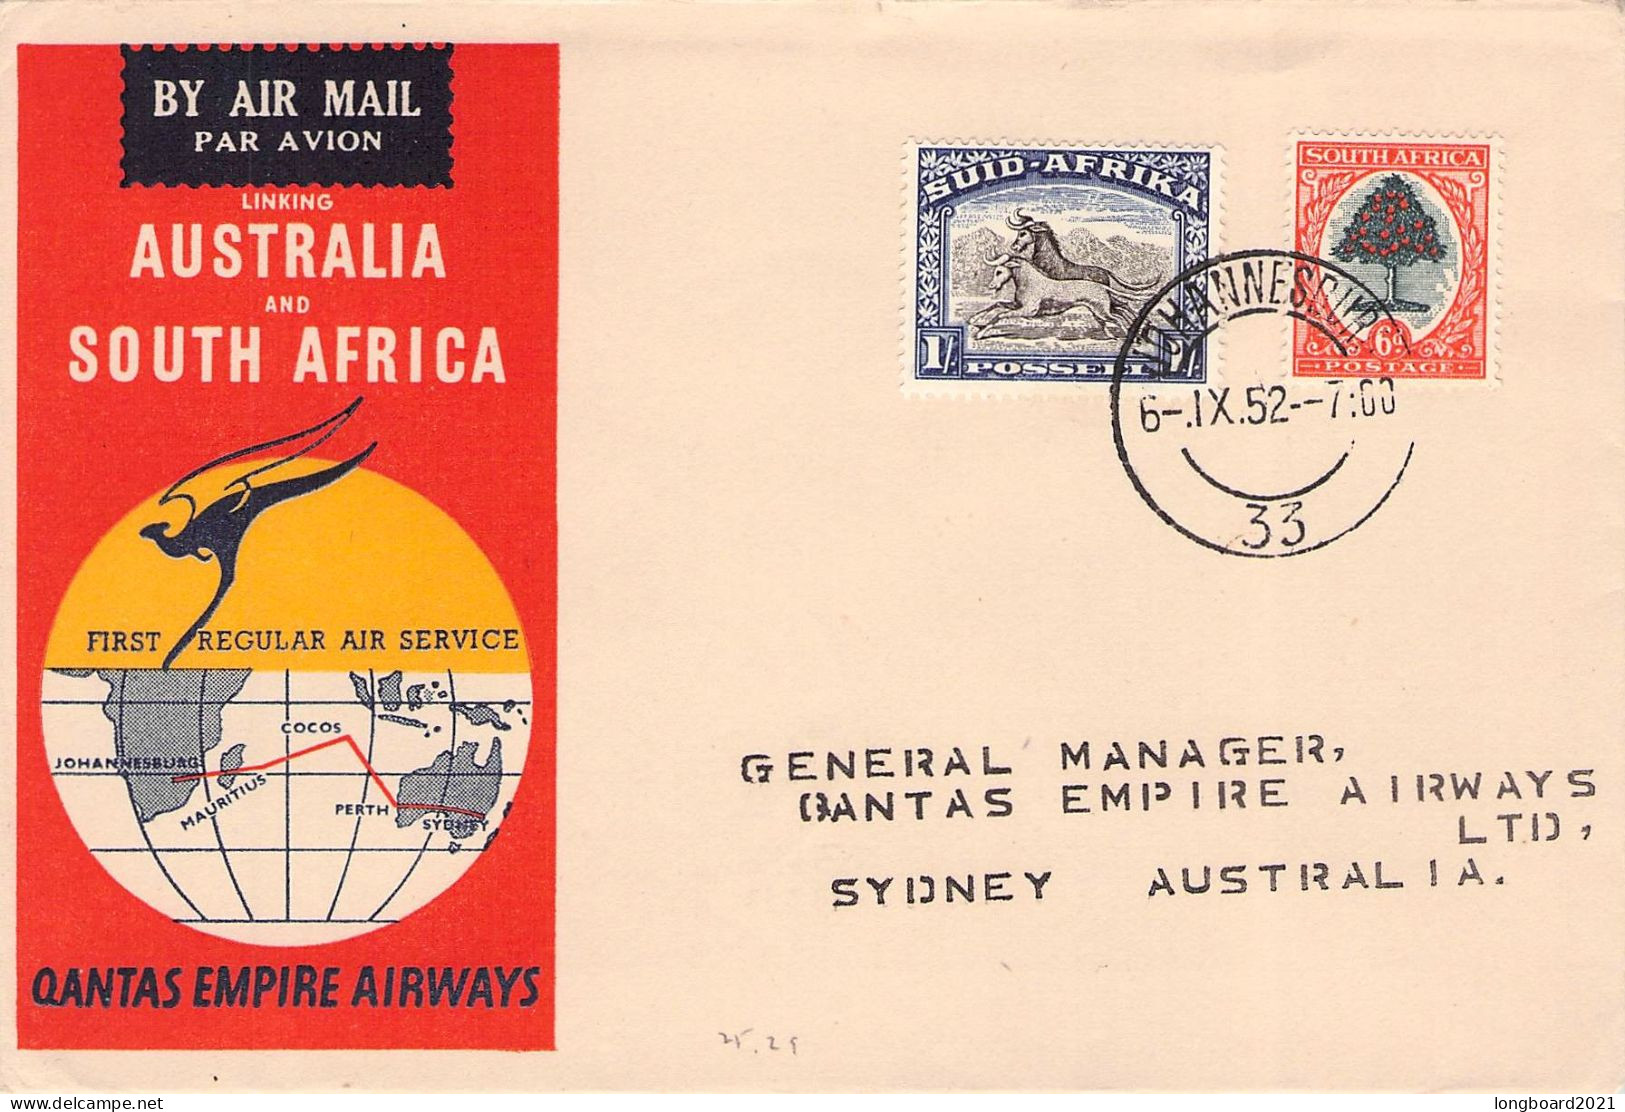 SOUTH AFRICA - FIRST FLIGHT 1952 QUANTAS AUSTRALIA - SOUTH AFRICA / 5236 - Airmail